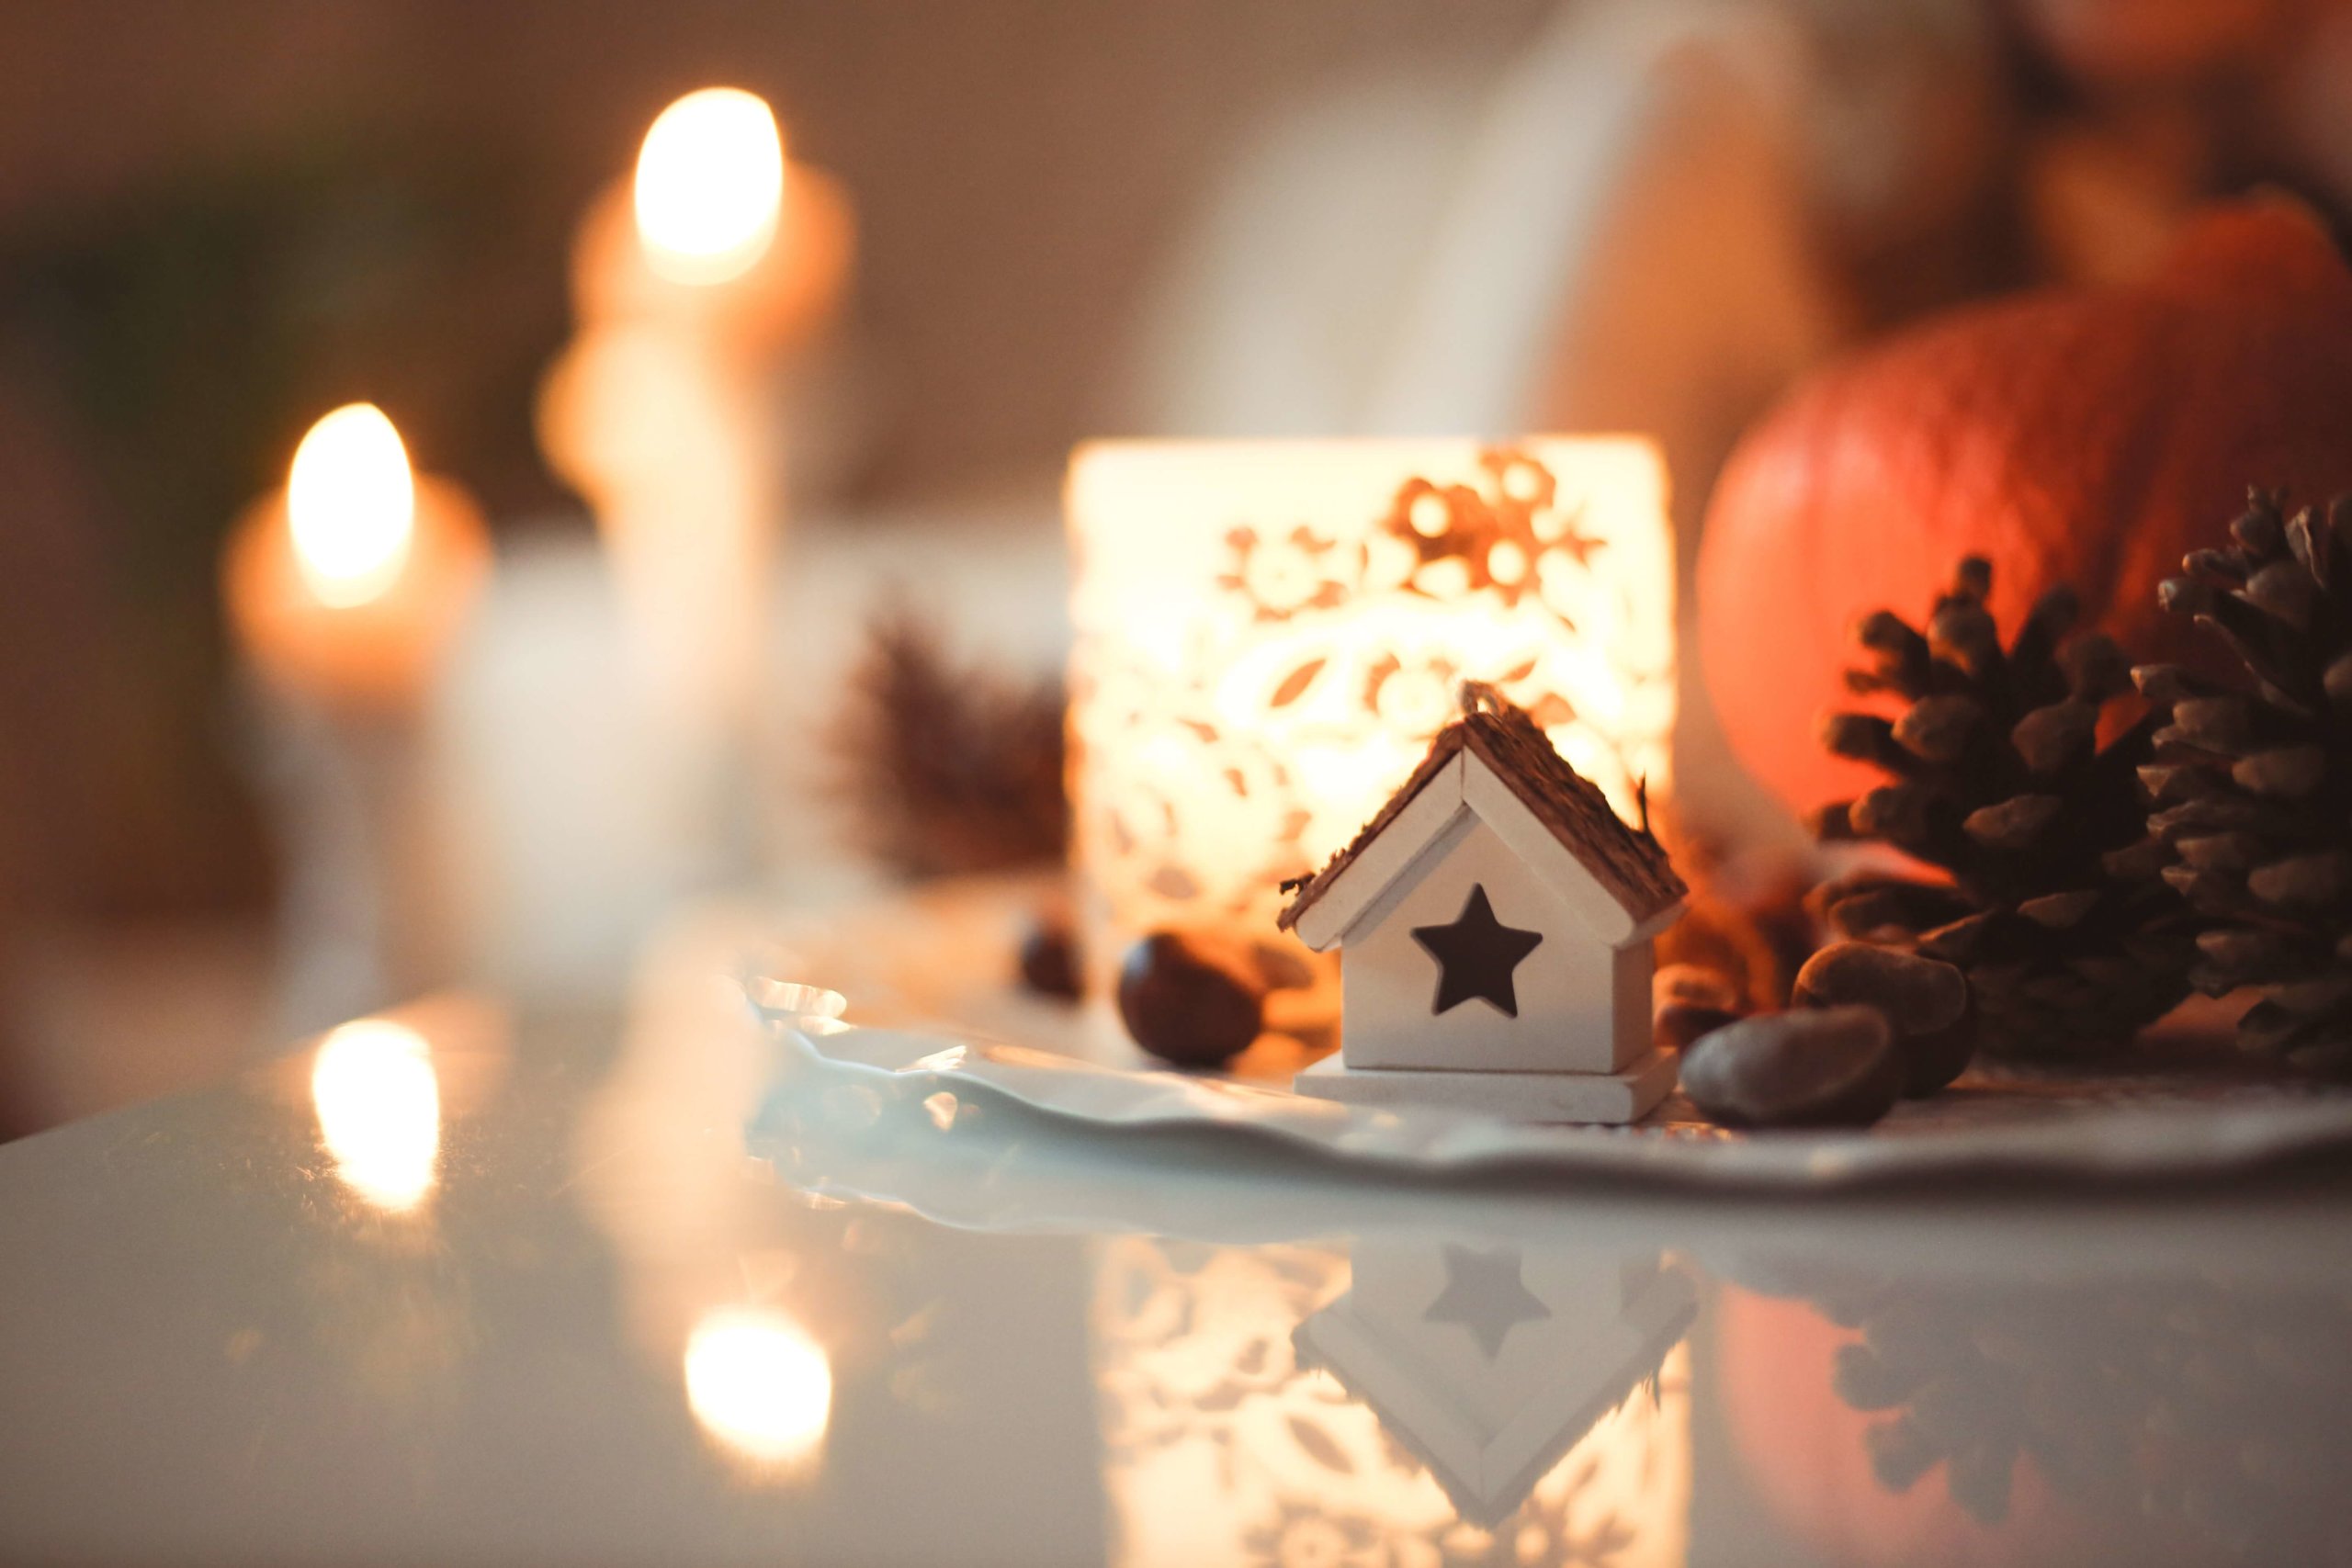 3 Relationship Stressors To Avoid This Holiday Season